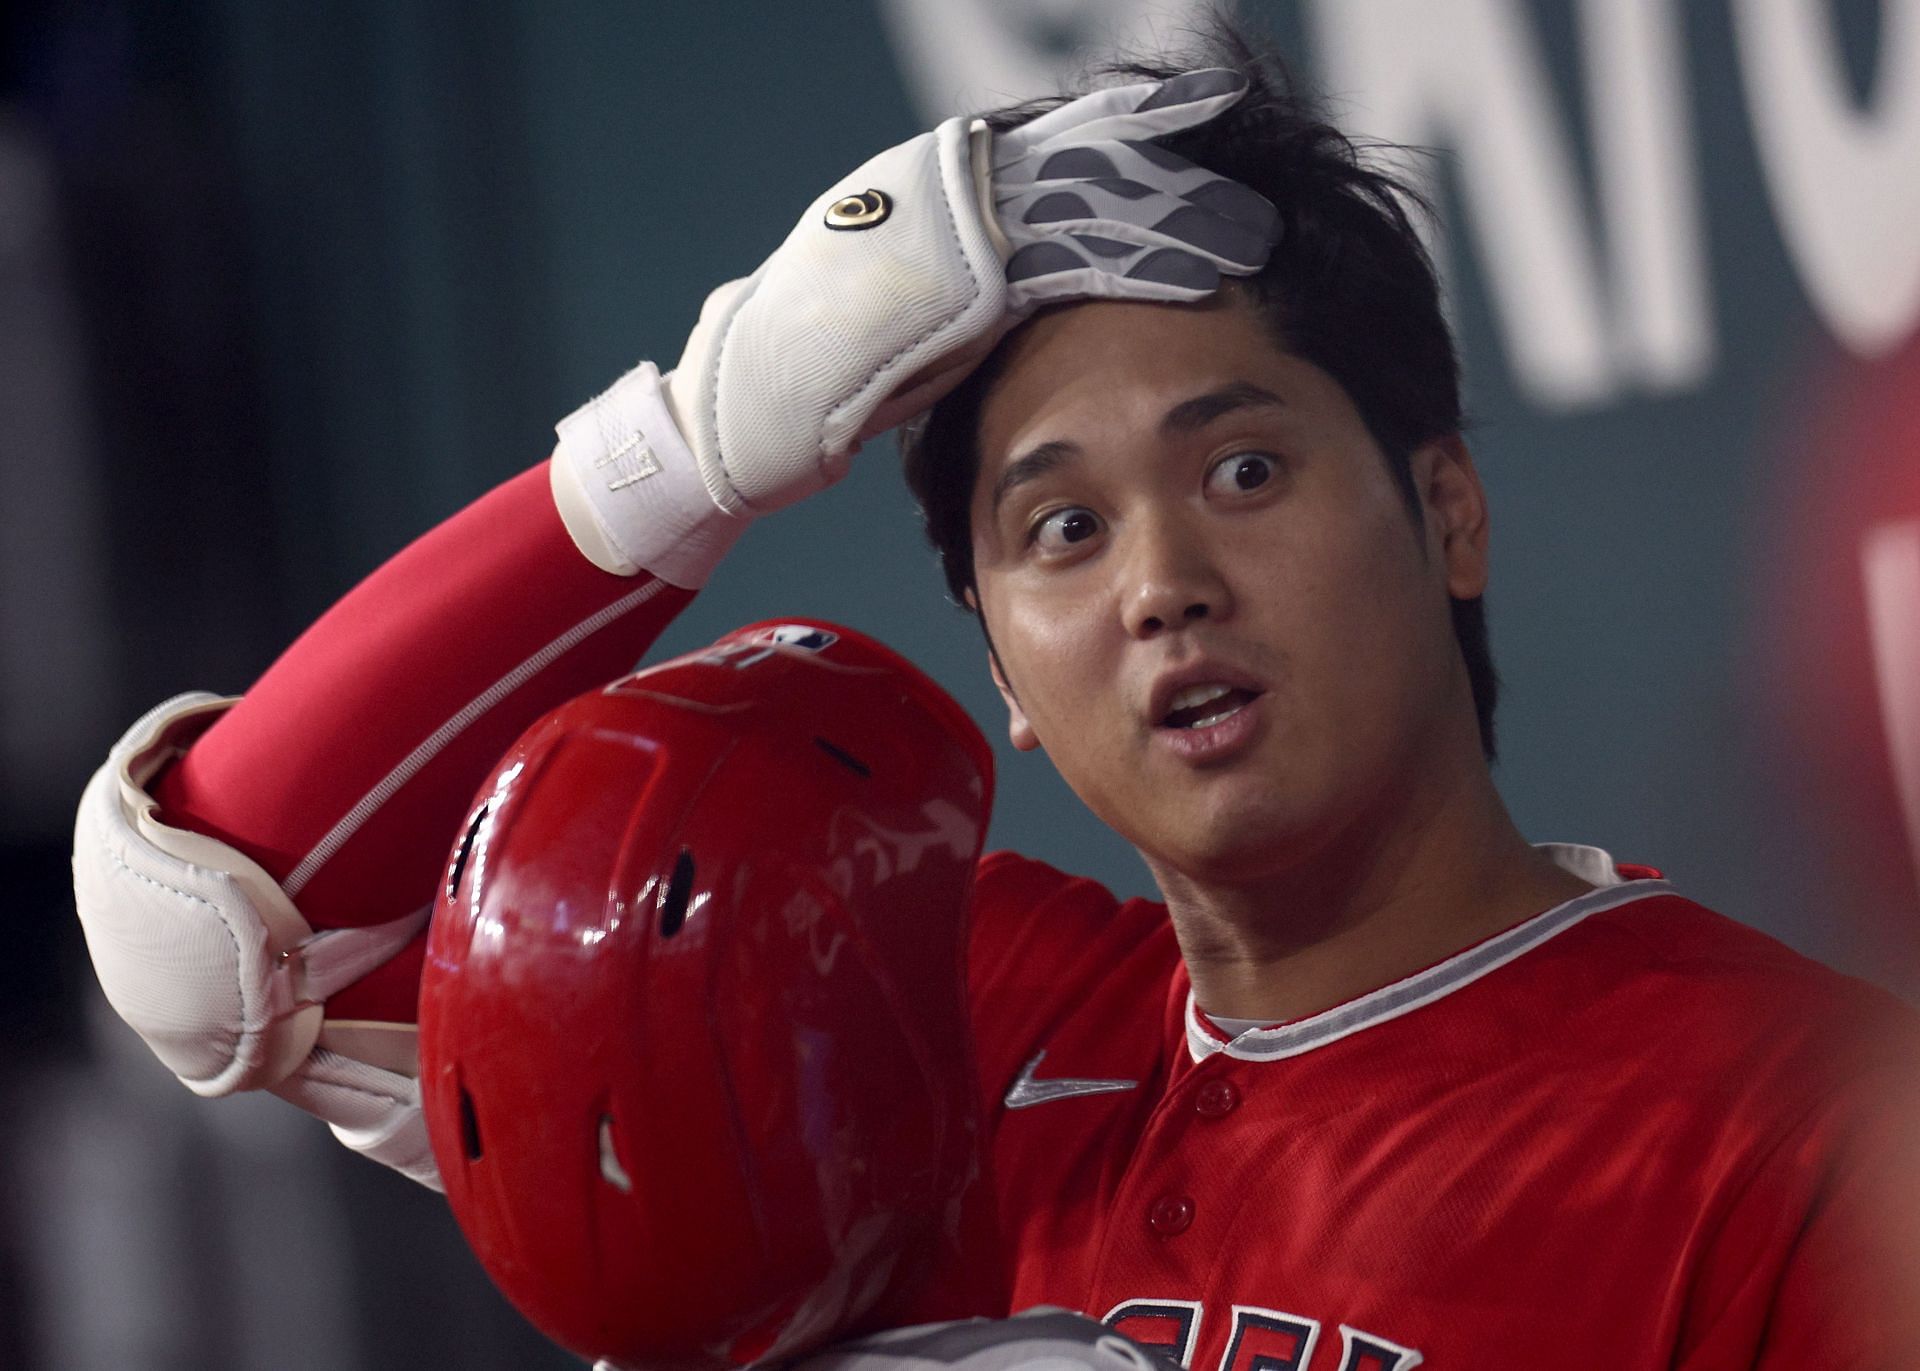 MLB insider believes Shohei Ohtani made a mistake agreeing to a one-year  deal to avoid arbitration with Angels: $35 million to $45 million range